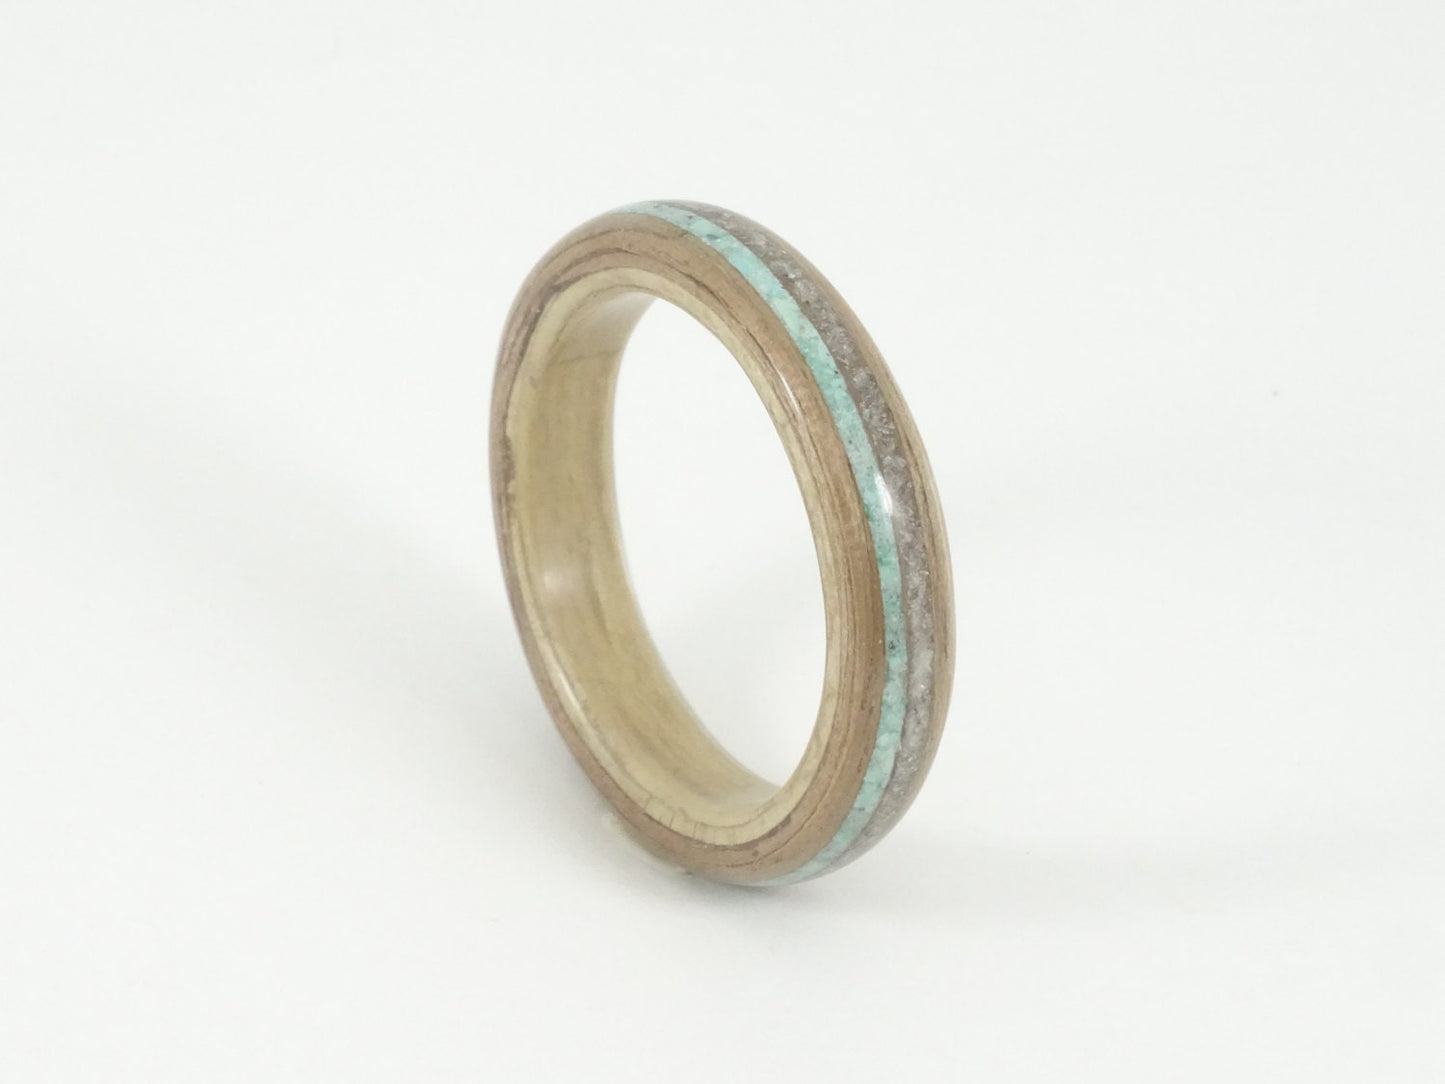 Walnut & Oak Wood Ring with Sand and Turquoise